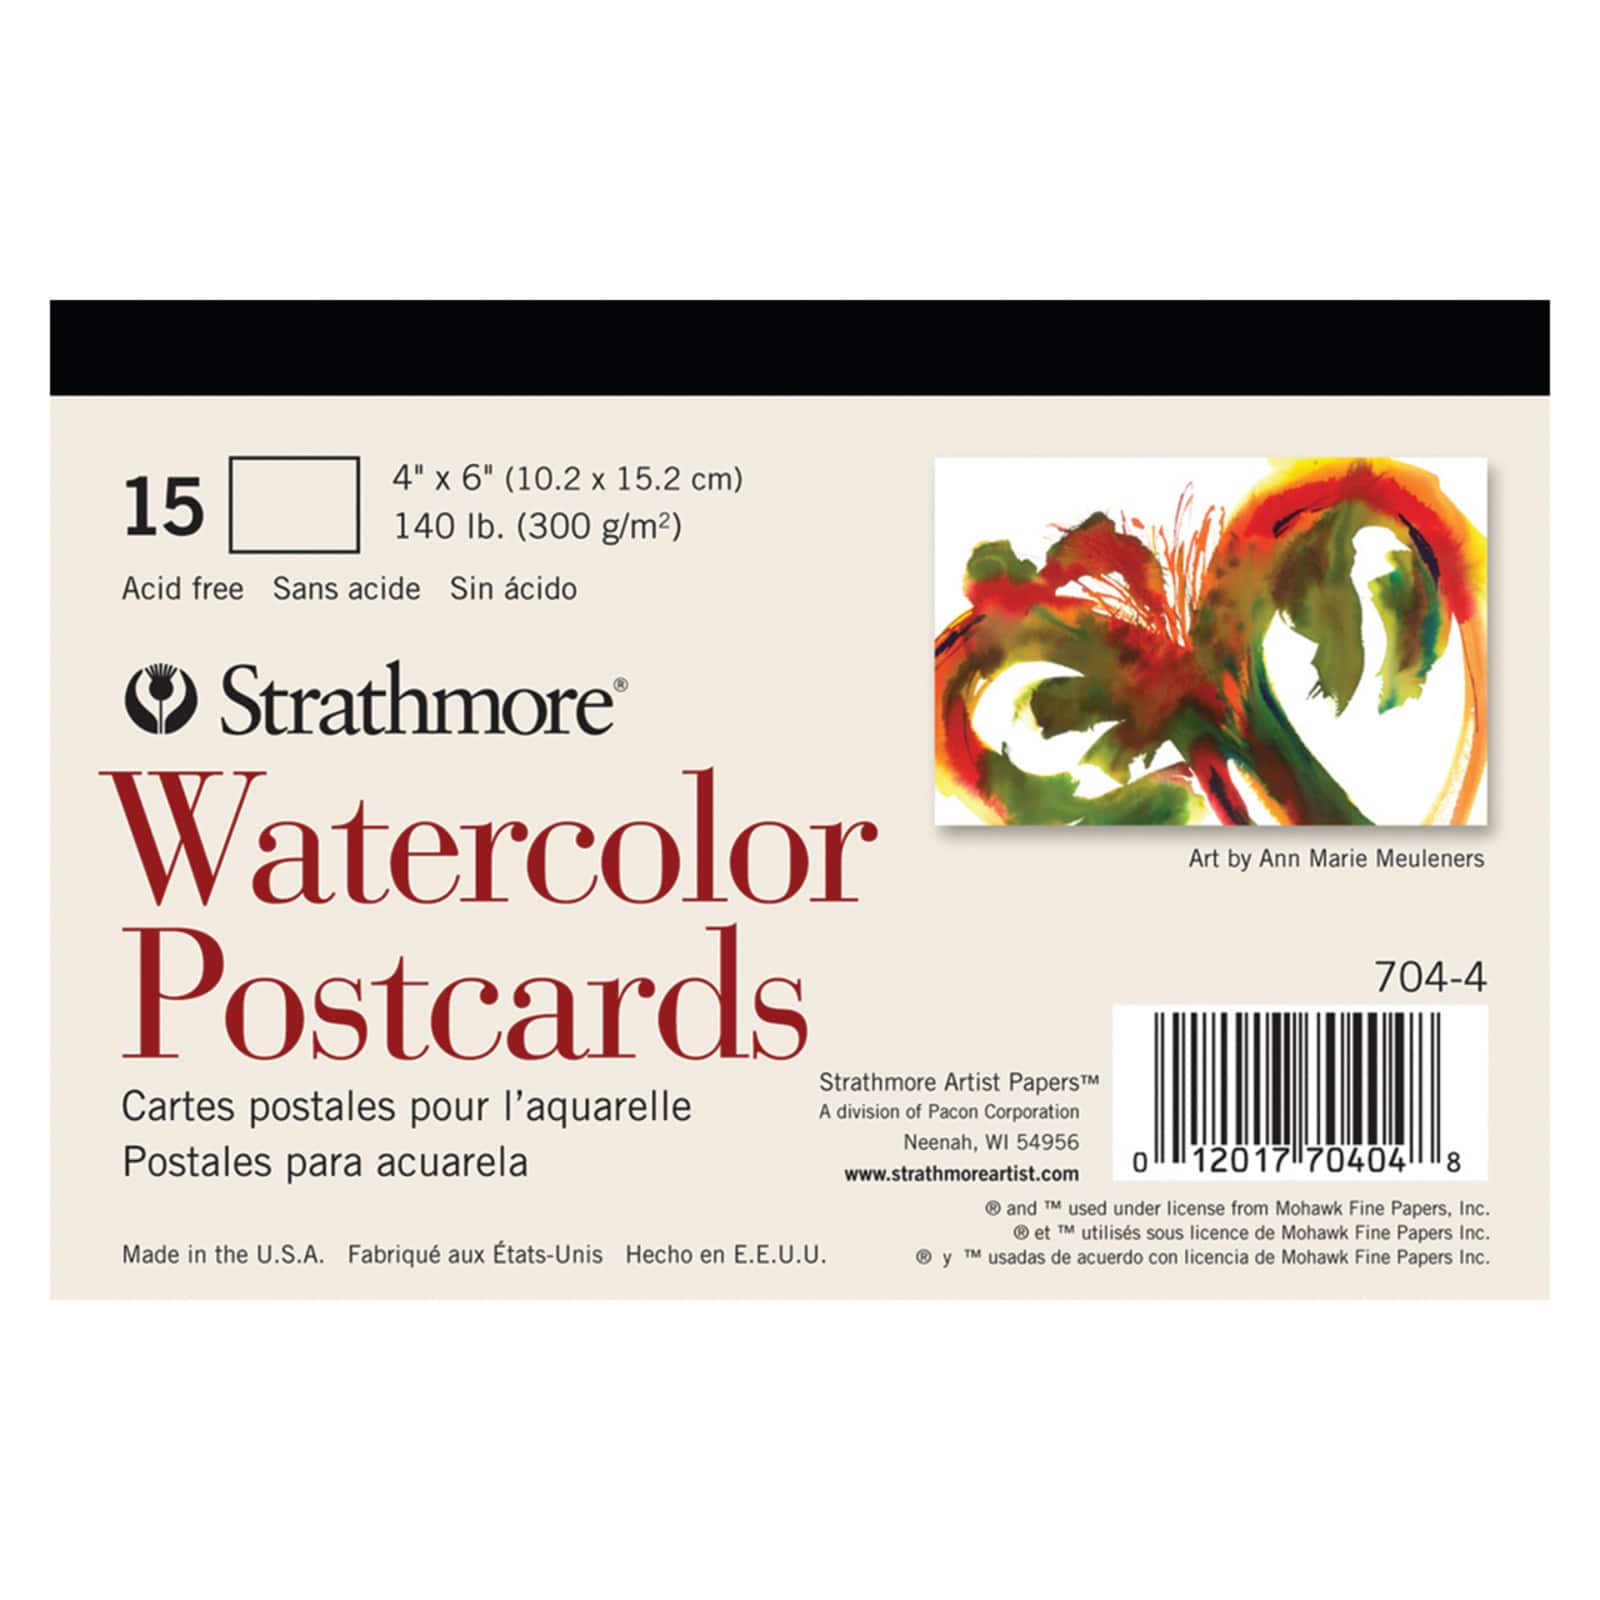 Strathmore Clear Plastic Sleeves - Greeting Cards